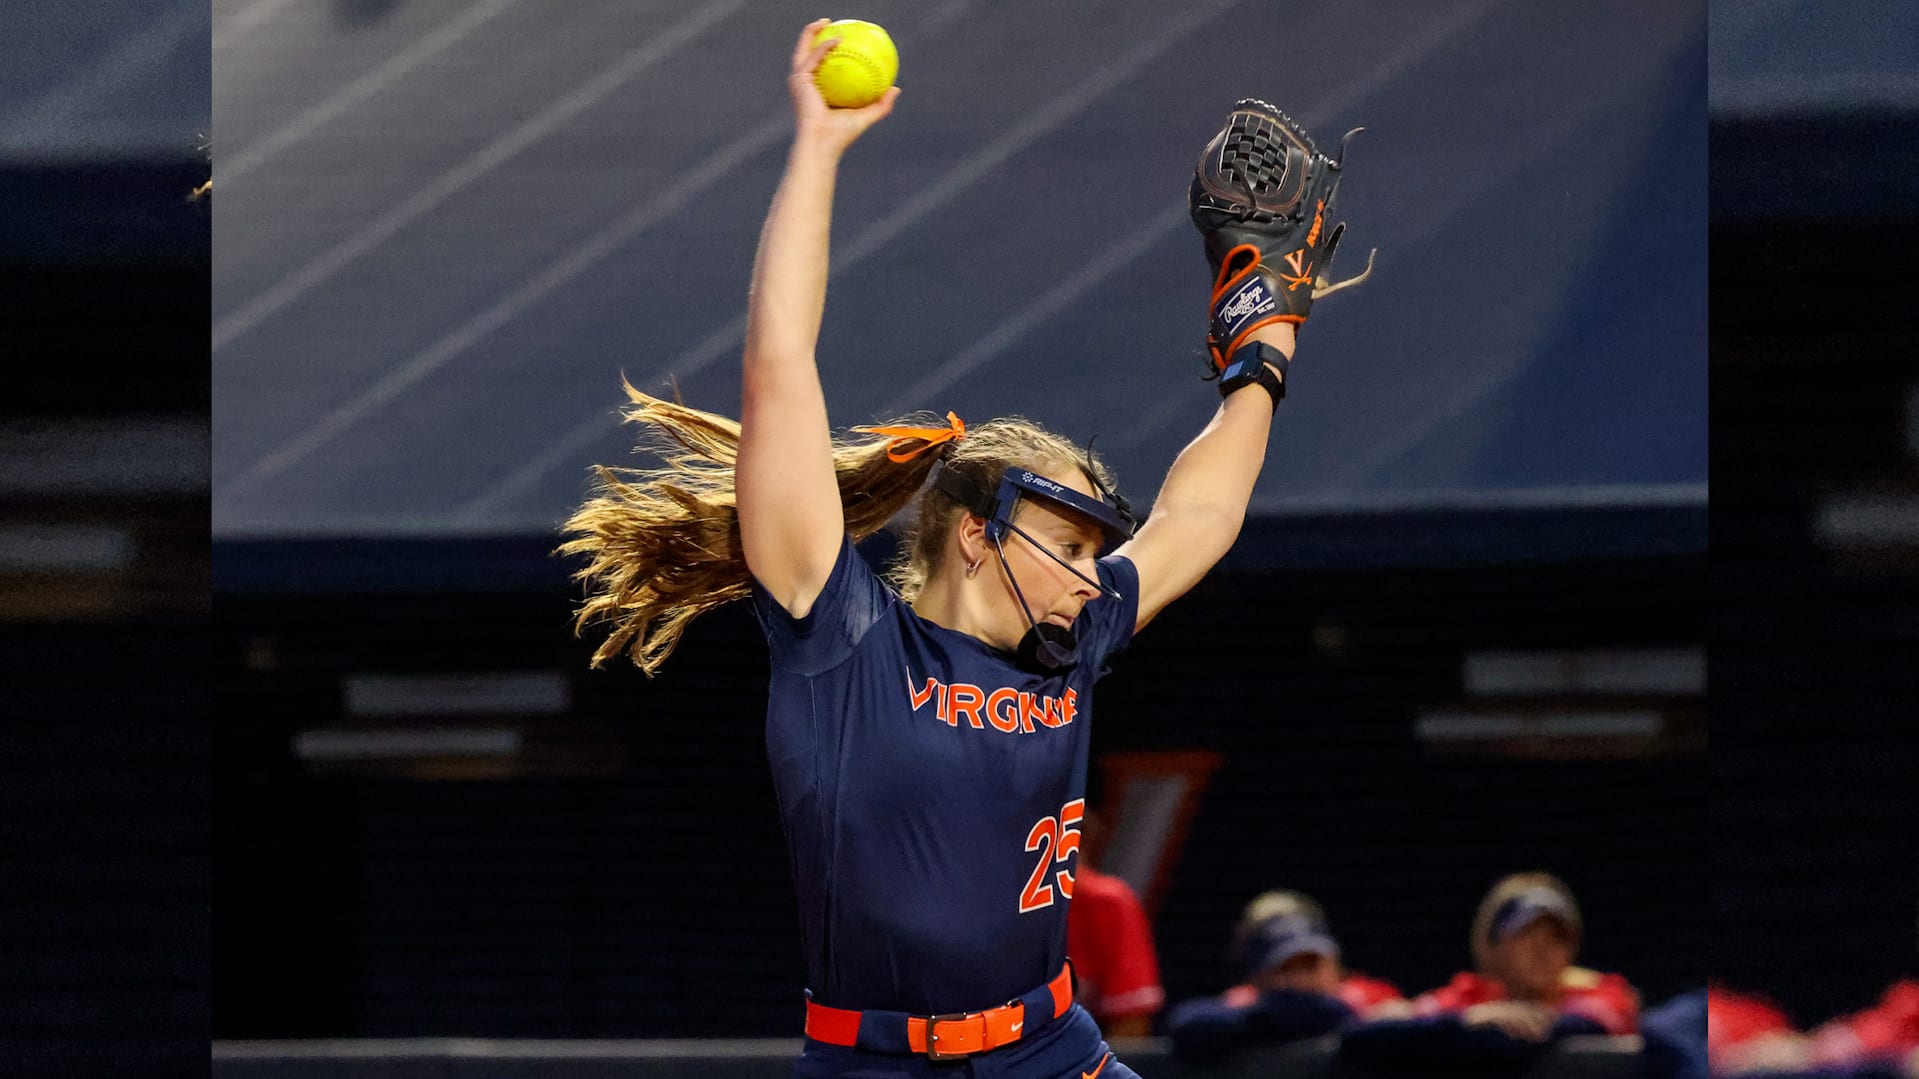 Mikayla Houge delivers a pitch during the Virginia softball game against Liberty at Palmer Park.